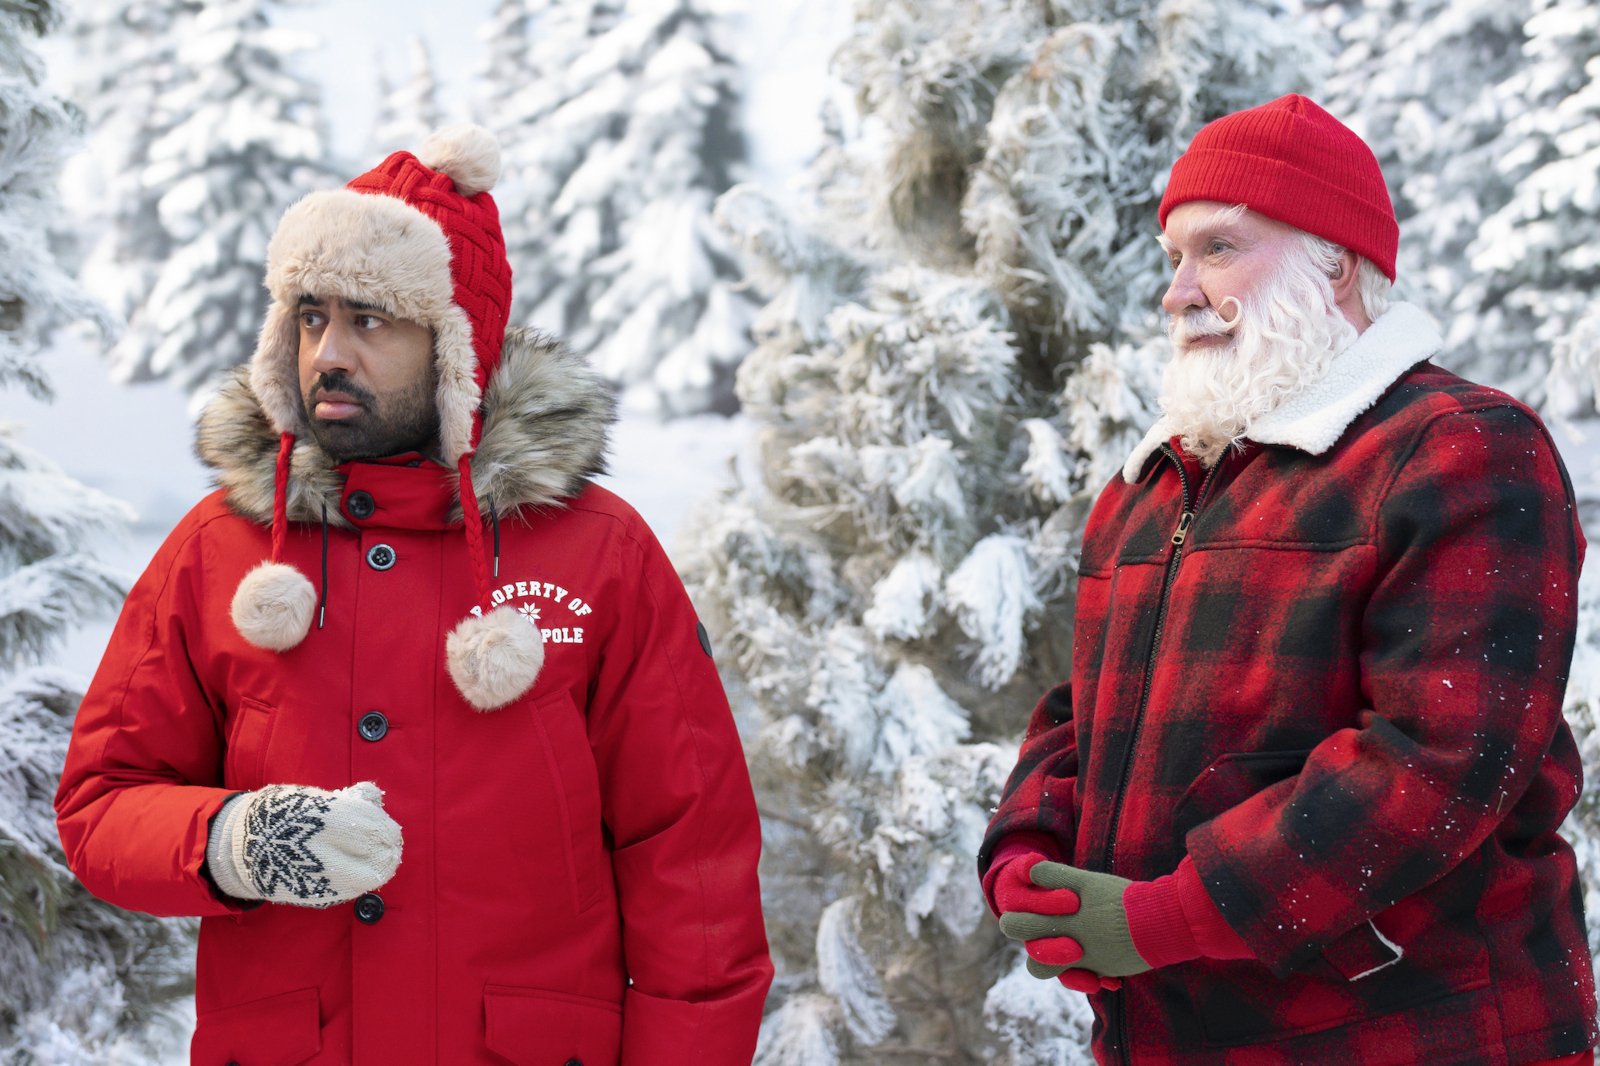 'The Santa Clauses' Episode 4 Preview Big Changes at the North Pole